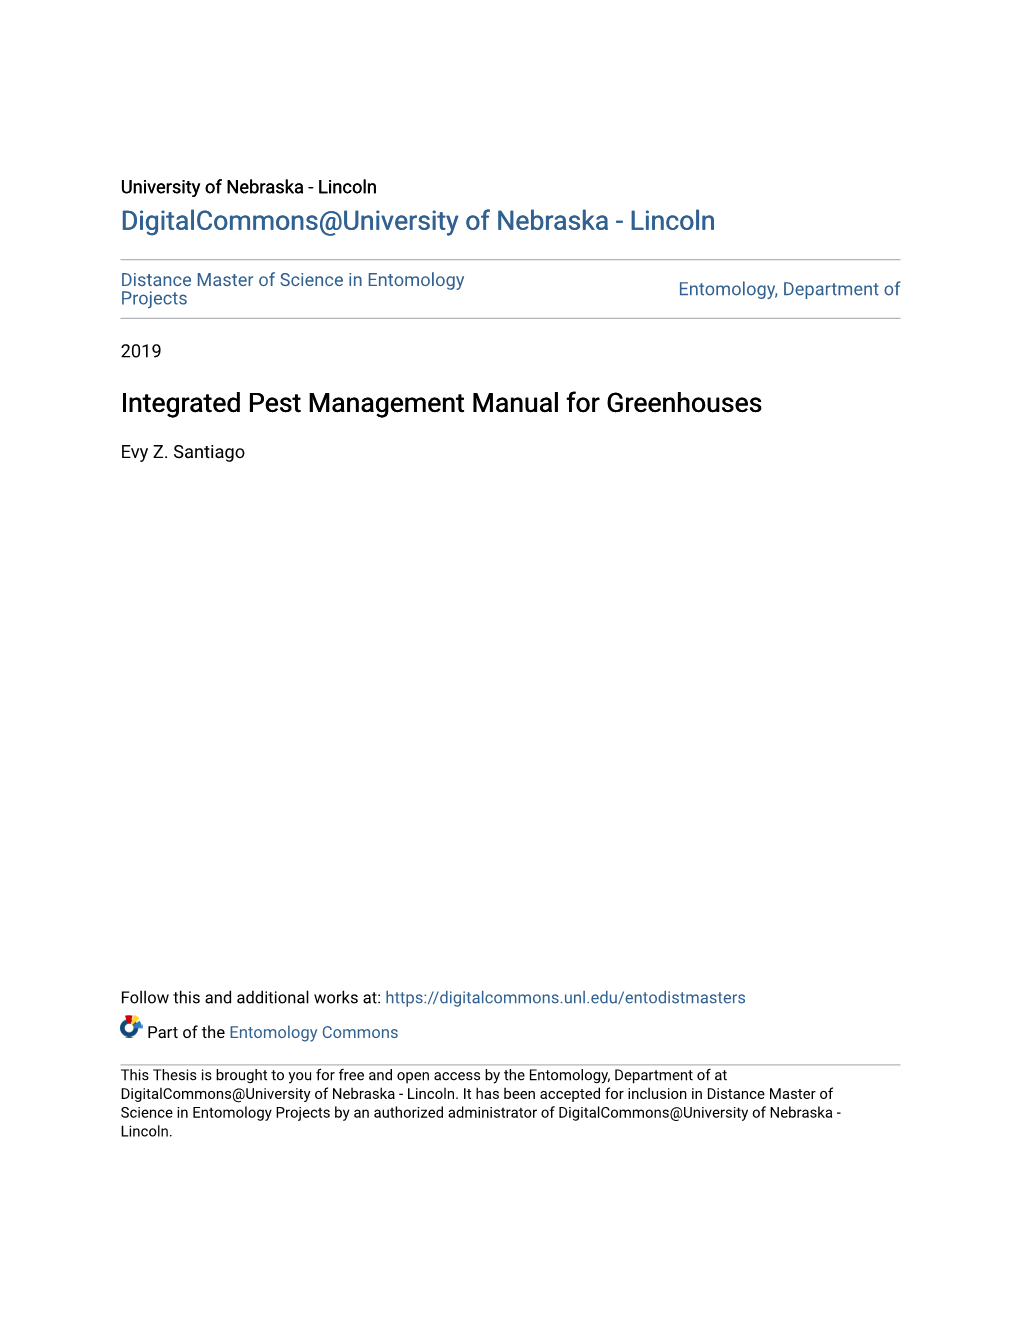 Integrated Pest Management Manual for Greenhouses